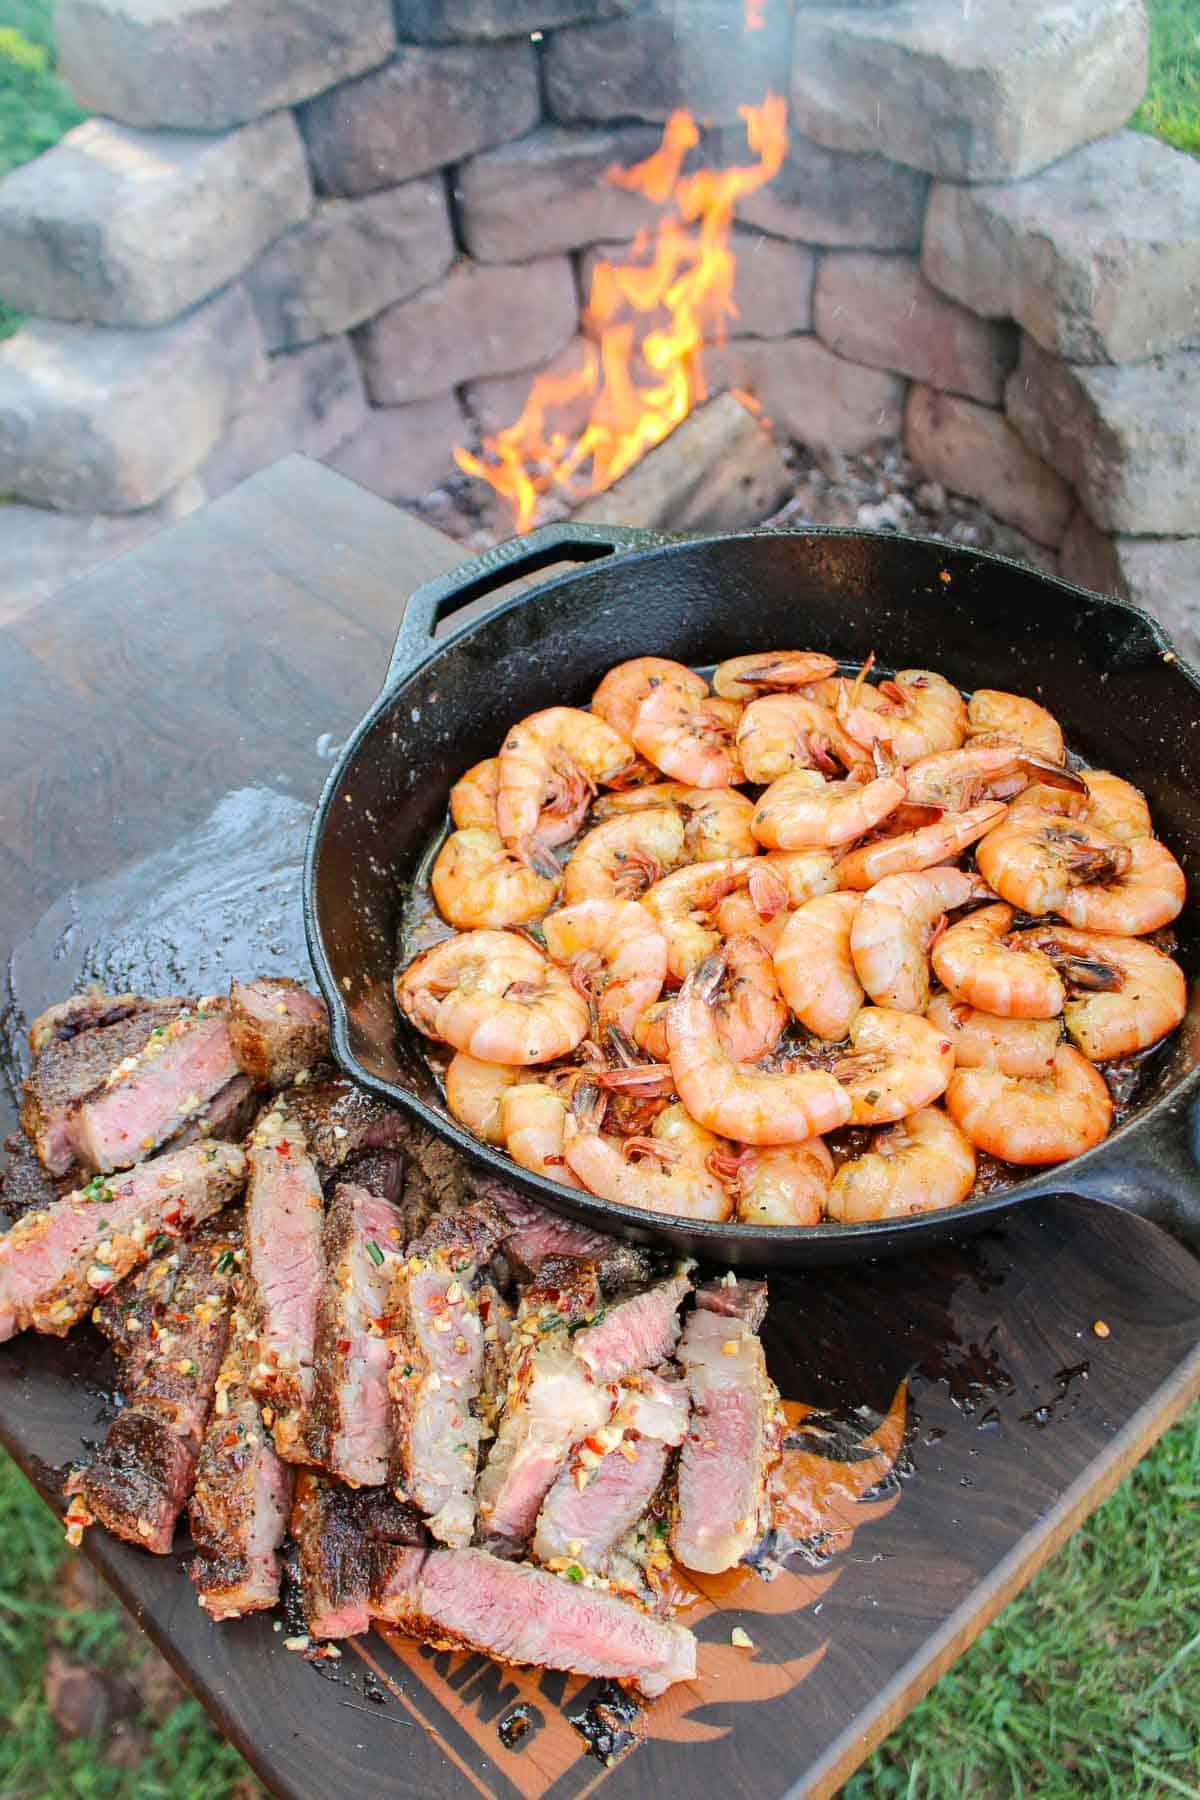 Chili Butter Steak and Shrimp plated and served.